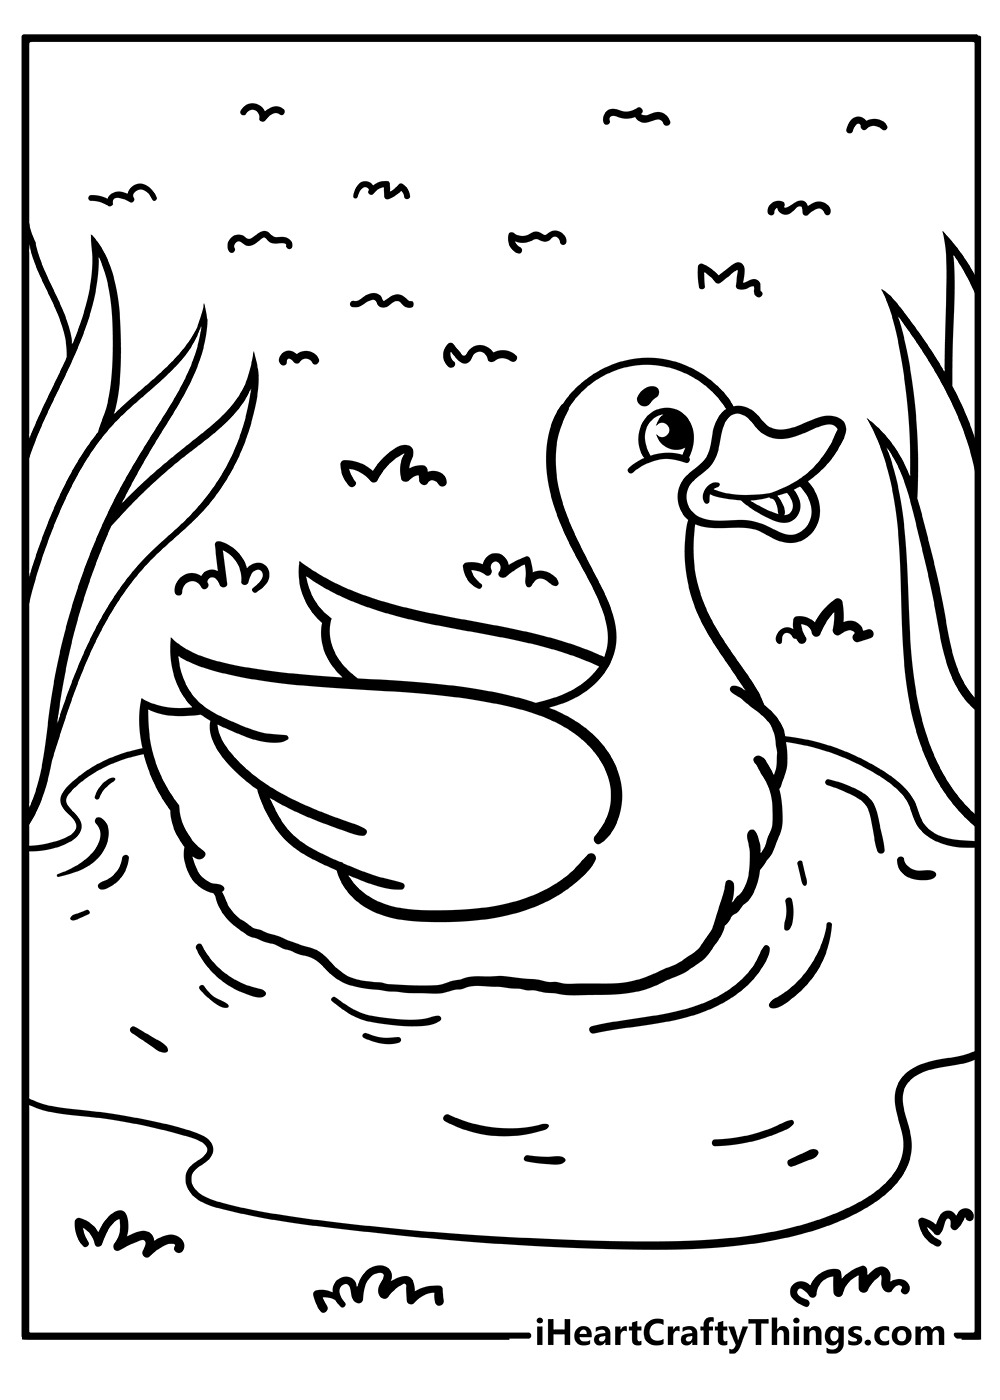 Printable Farm Animal Coloring Pages Updated 20